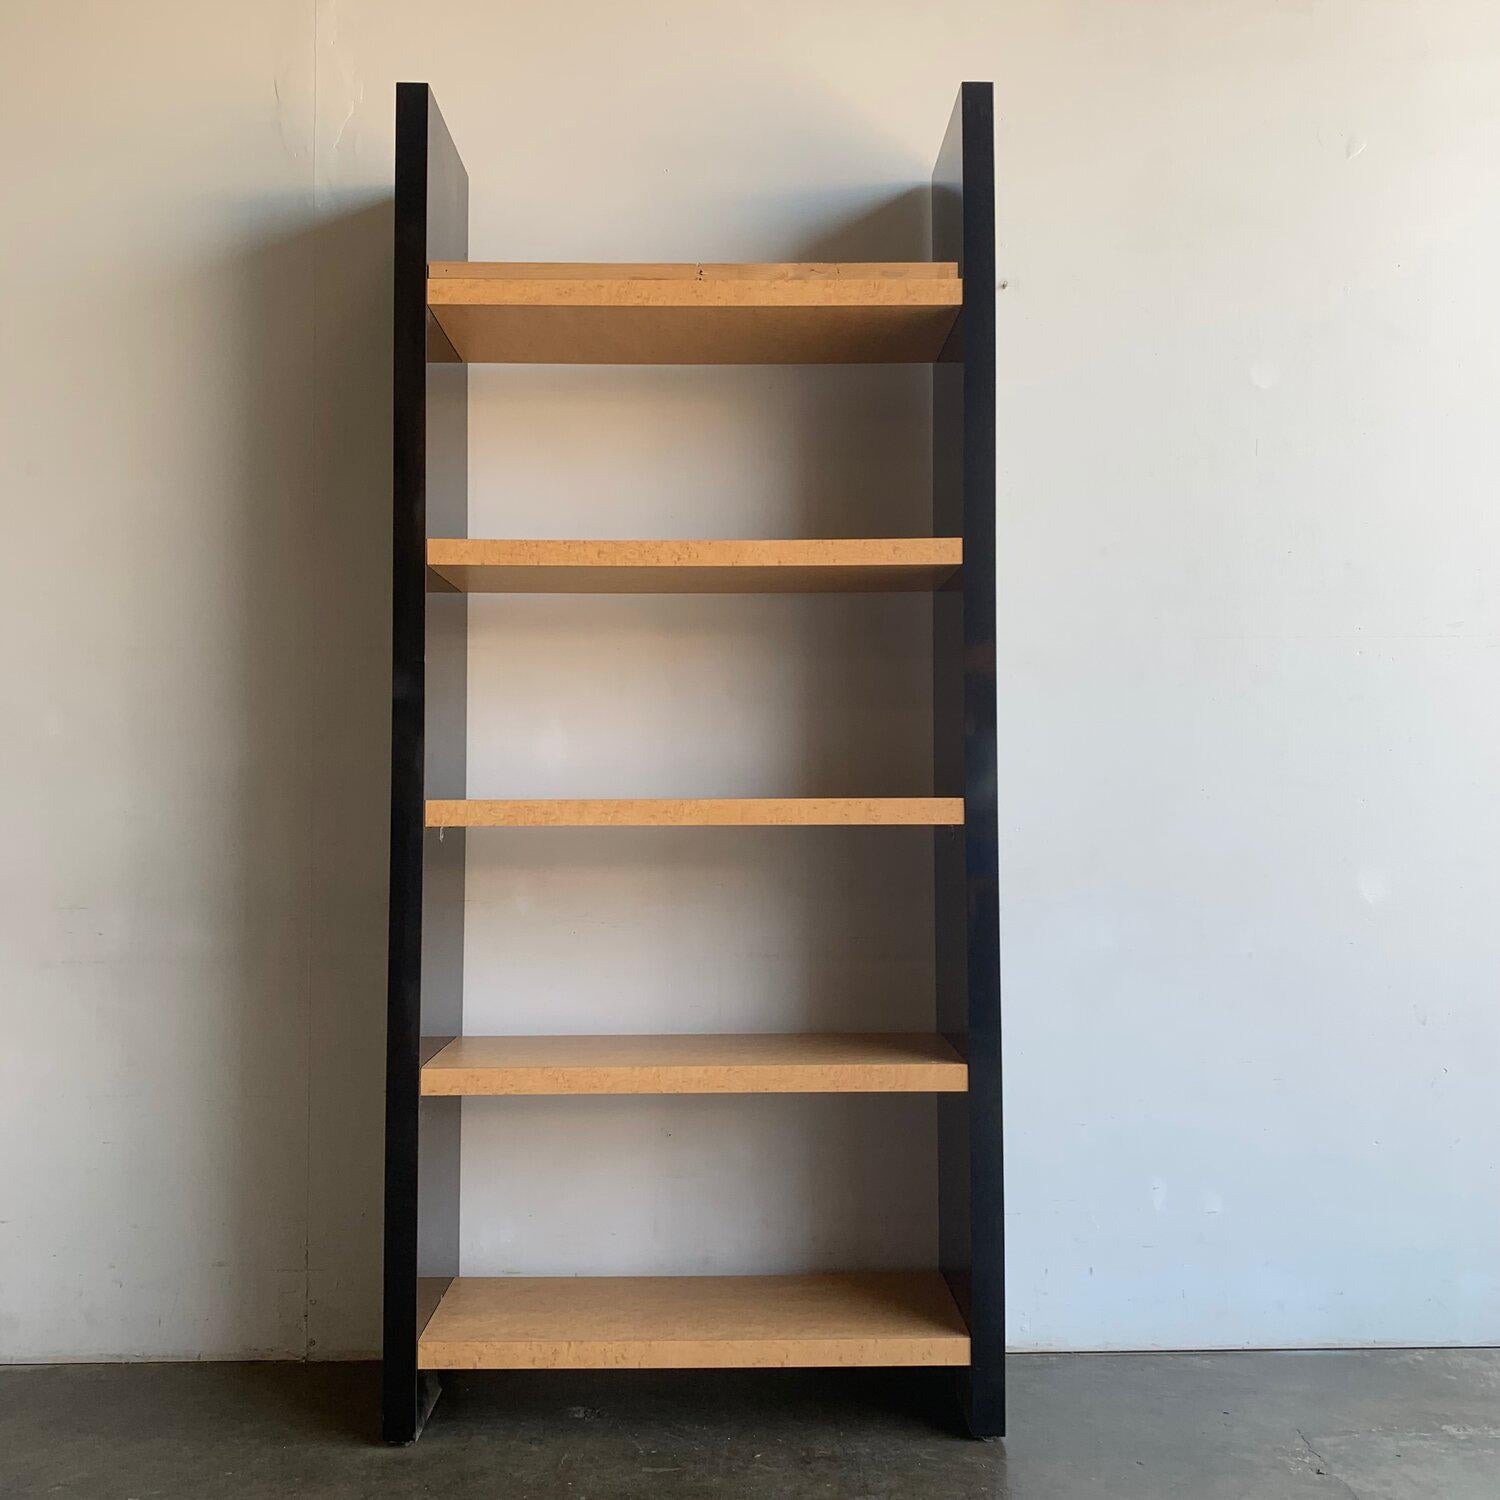 Measures: W36, D14, H80.

Very well preserved stationary shelving bookcase in black lacquer laminate and yellow maple laminate interior. Item has a support upper wooden bar that is used to secure bookshelf against wall for great stability. (See